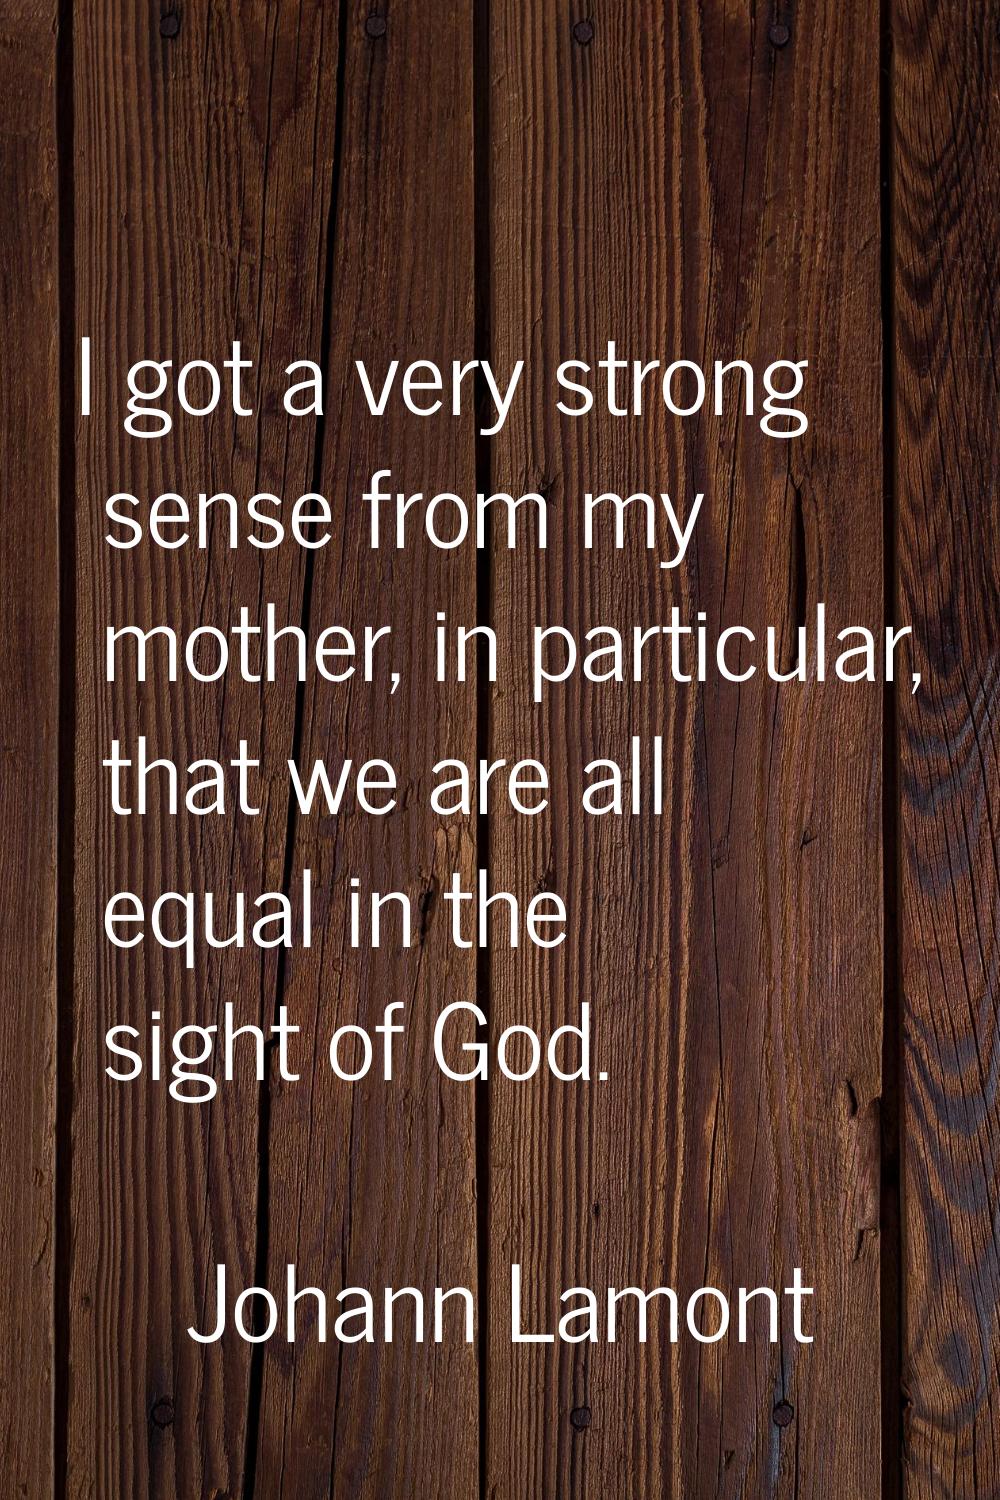 I got a very strong sense from my mother, in particular, that we are all equal in the sight of God.